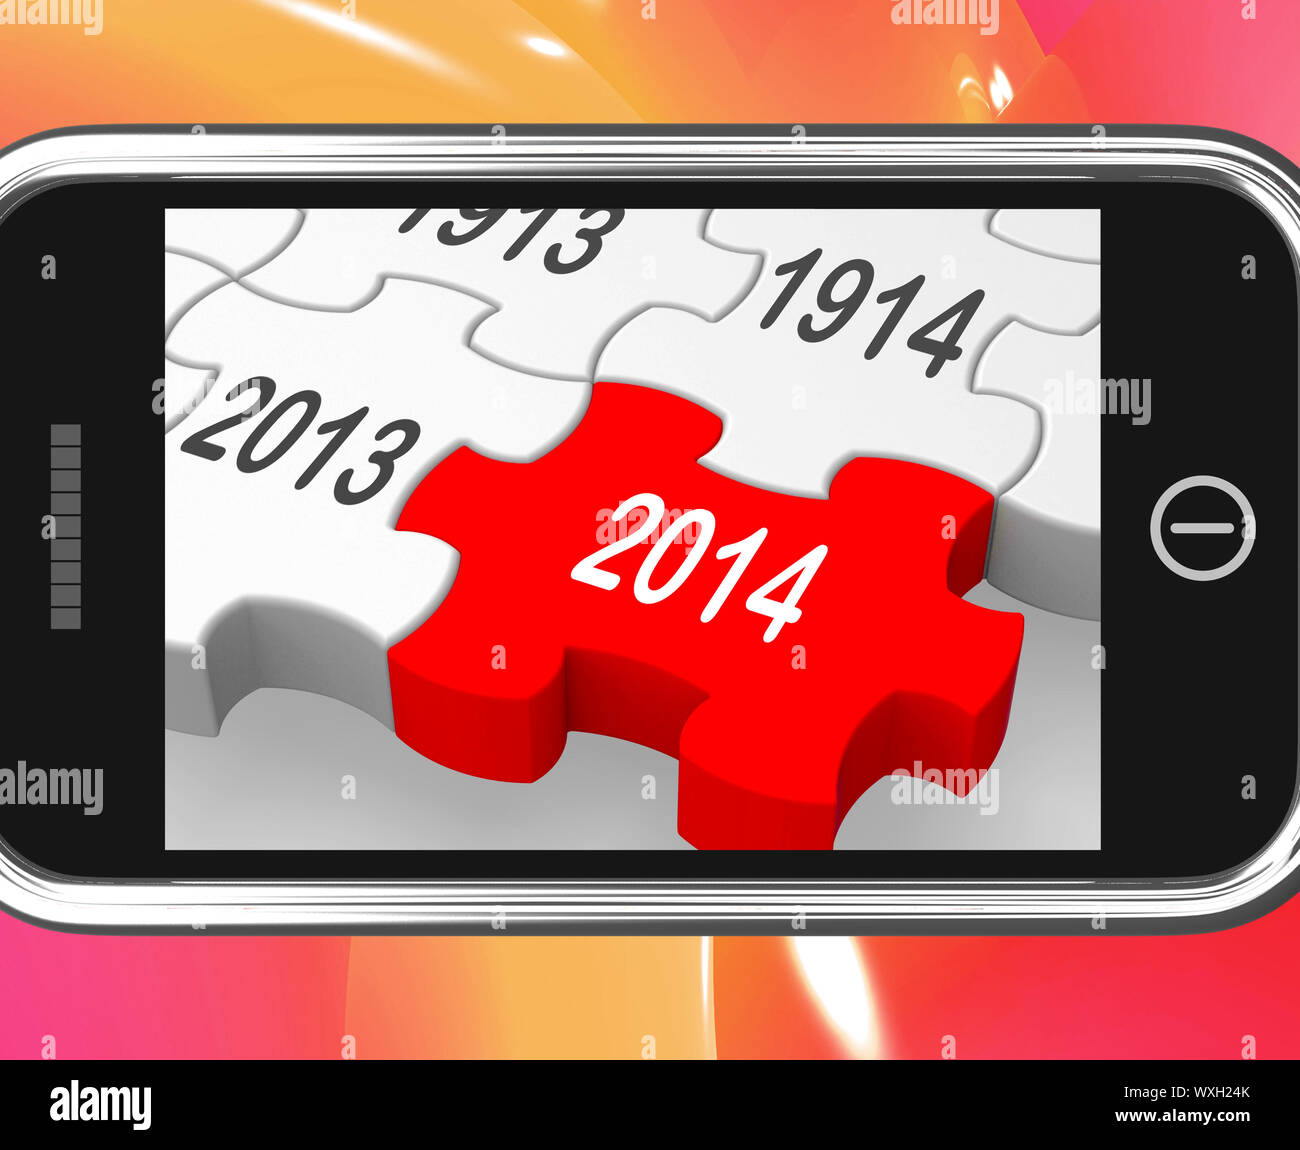 2014 On Smartphone Showing Forecasts And Predictions Stock Photo